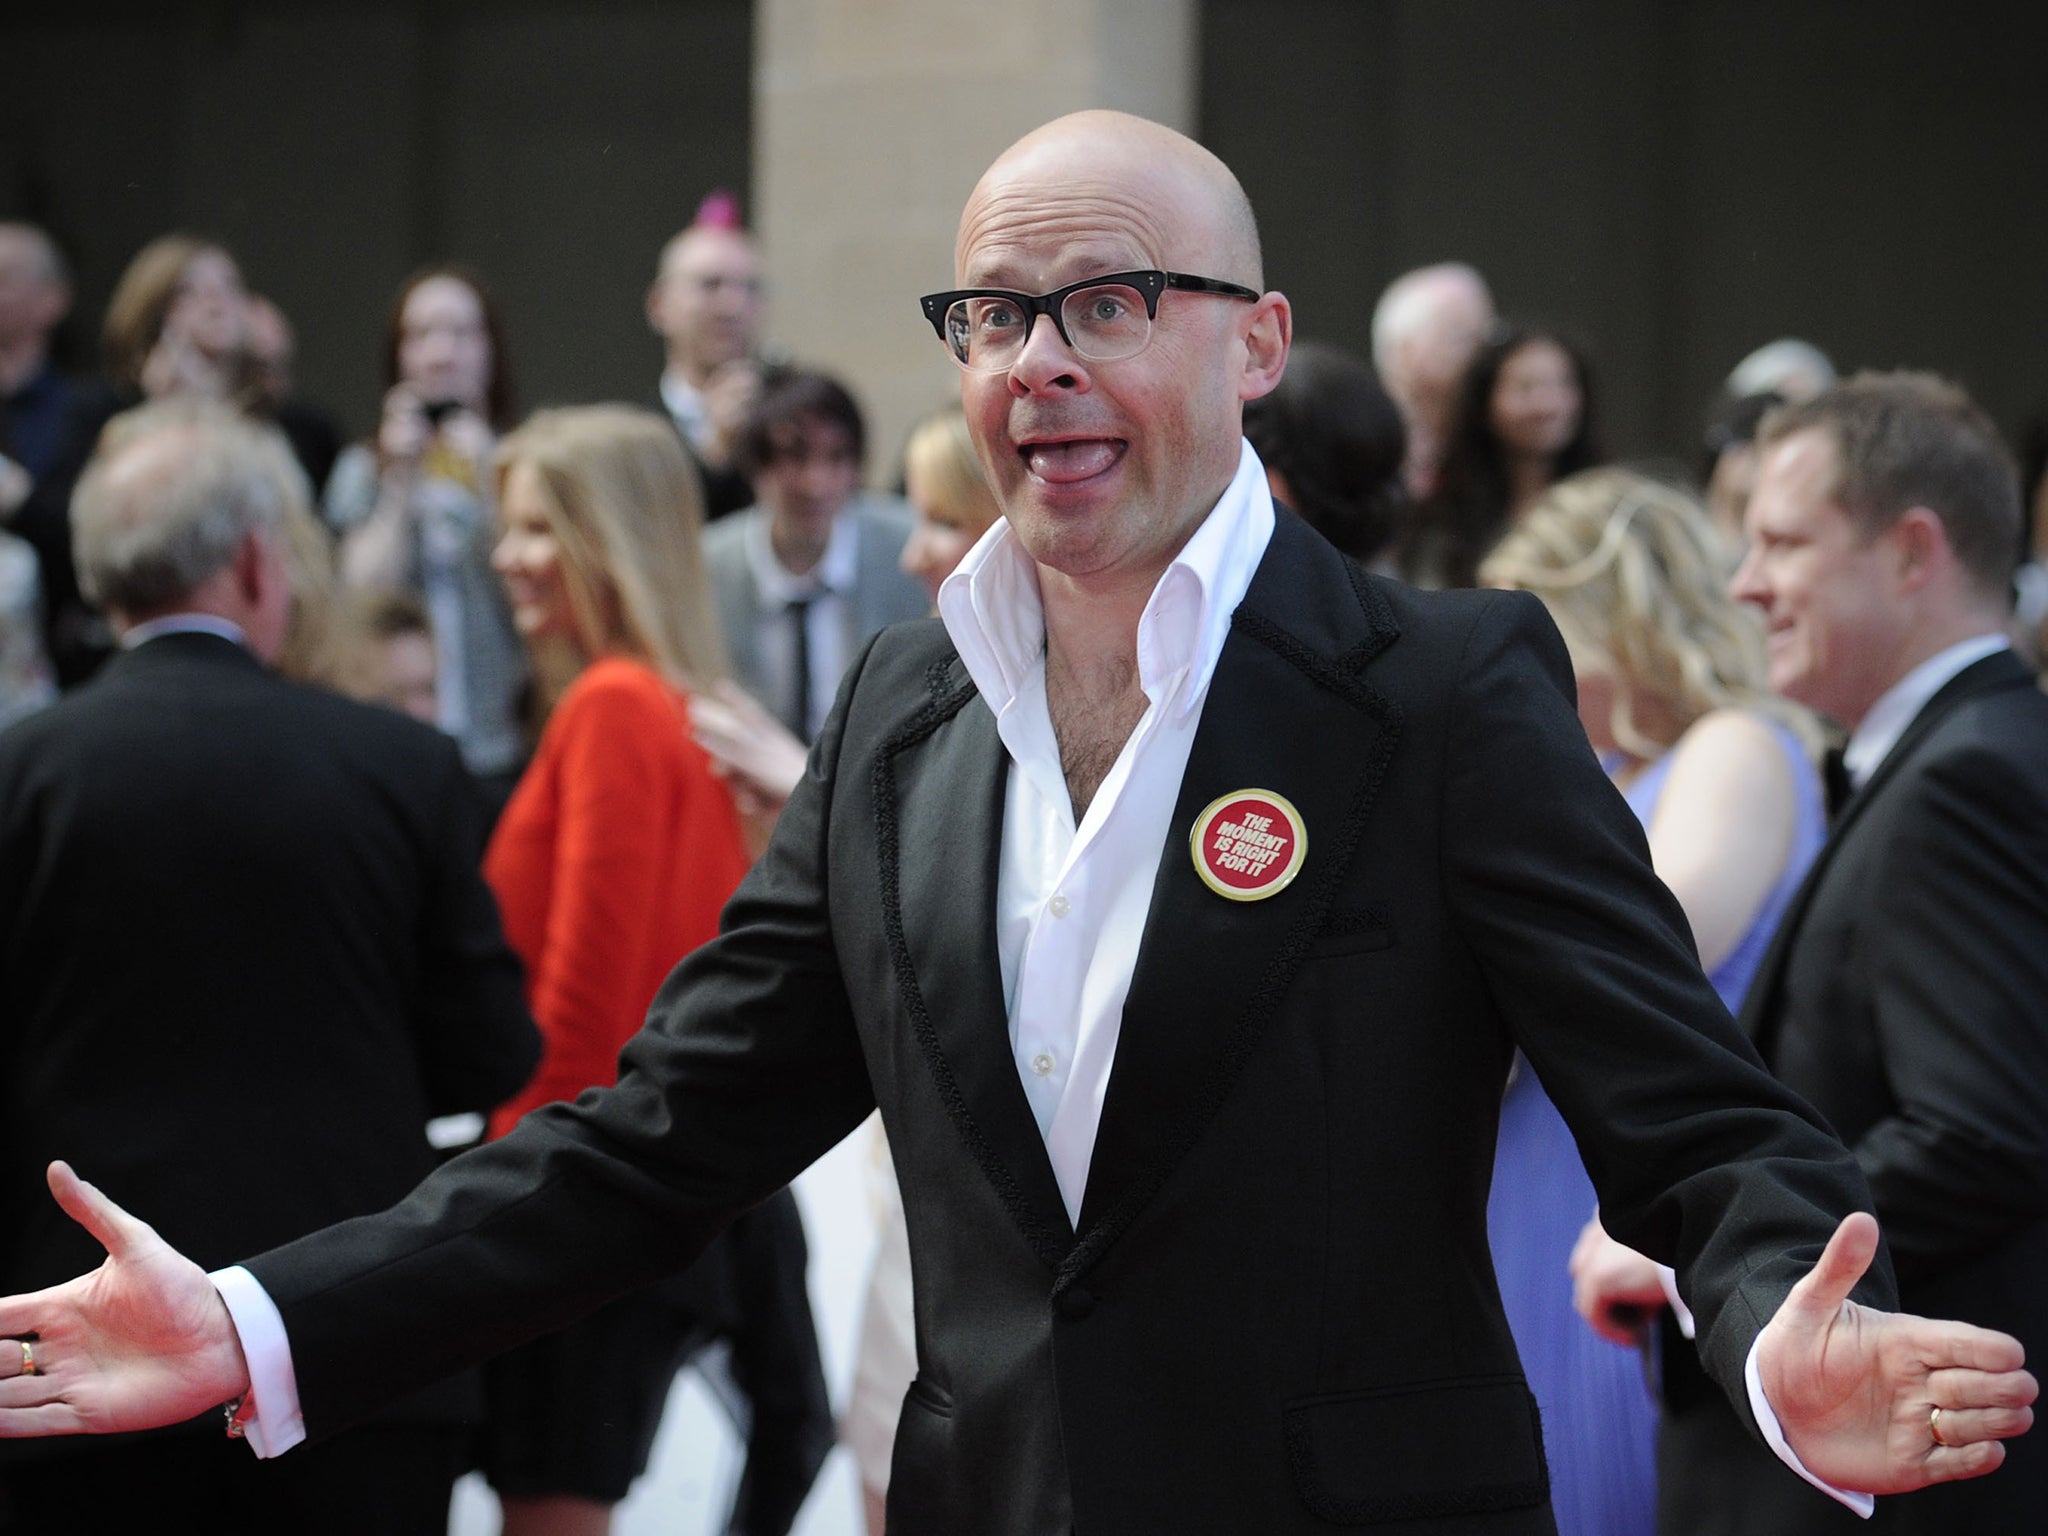 Harry Hill plays the Professor in the show and hopes it will help boost interest in science among young people